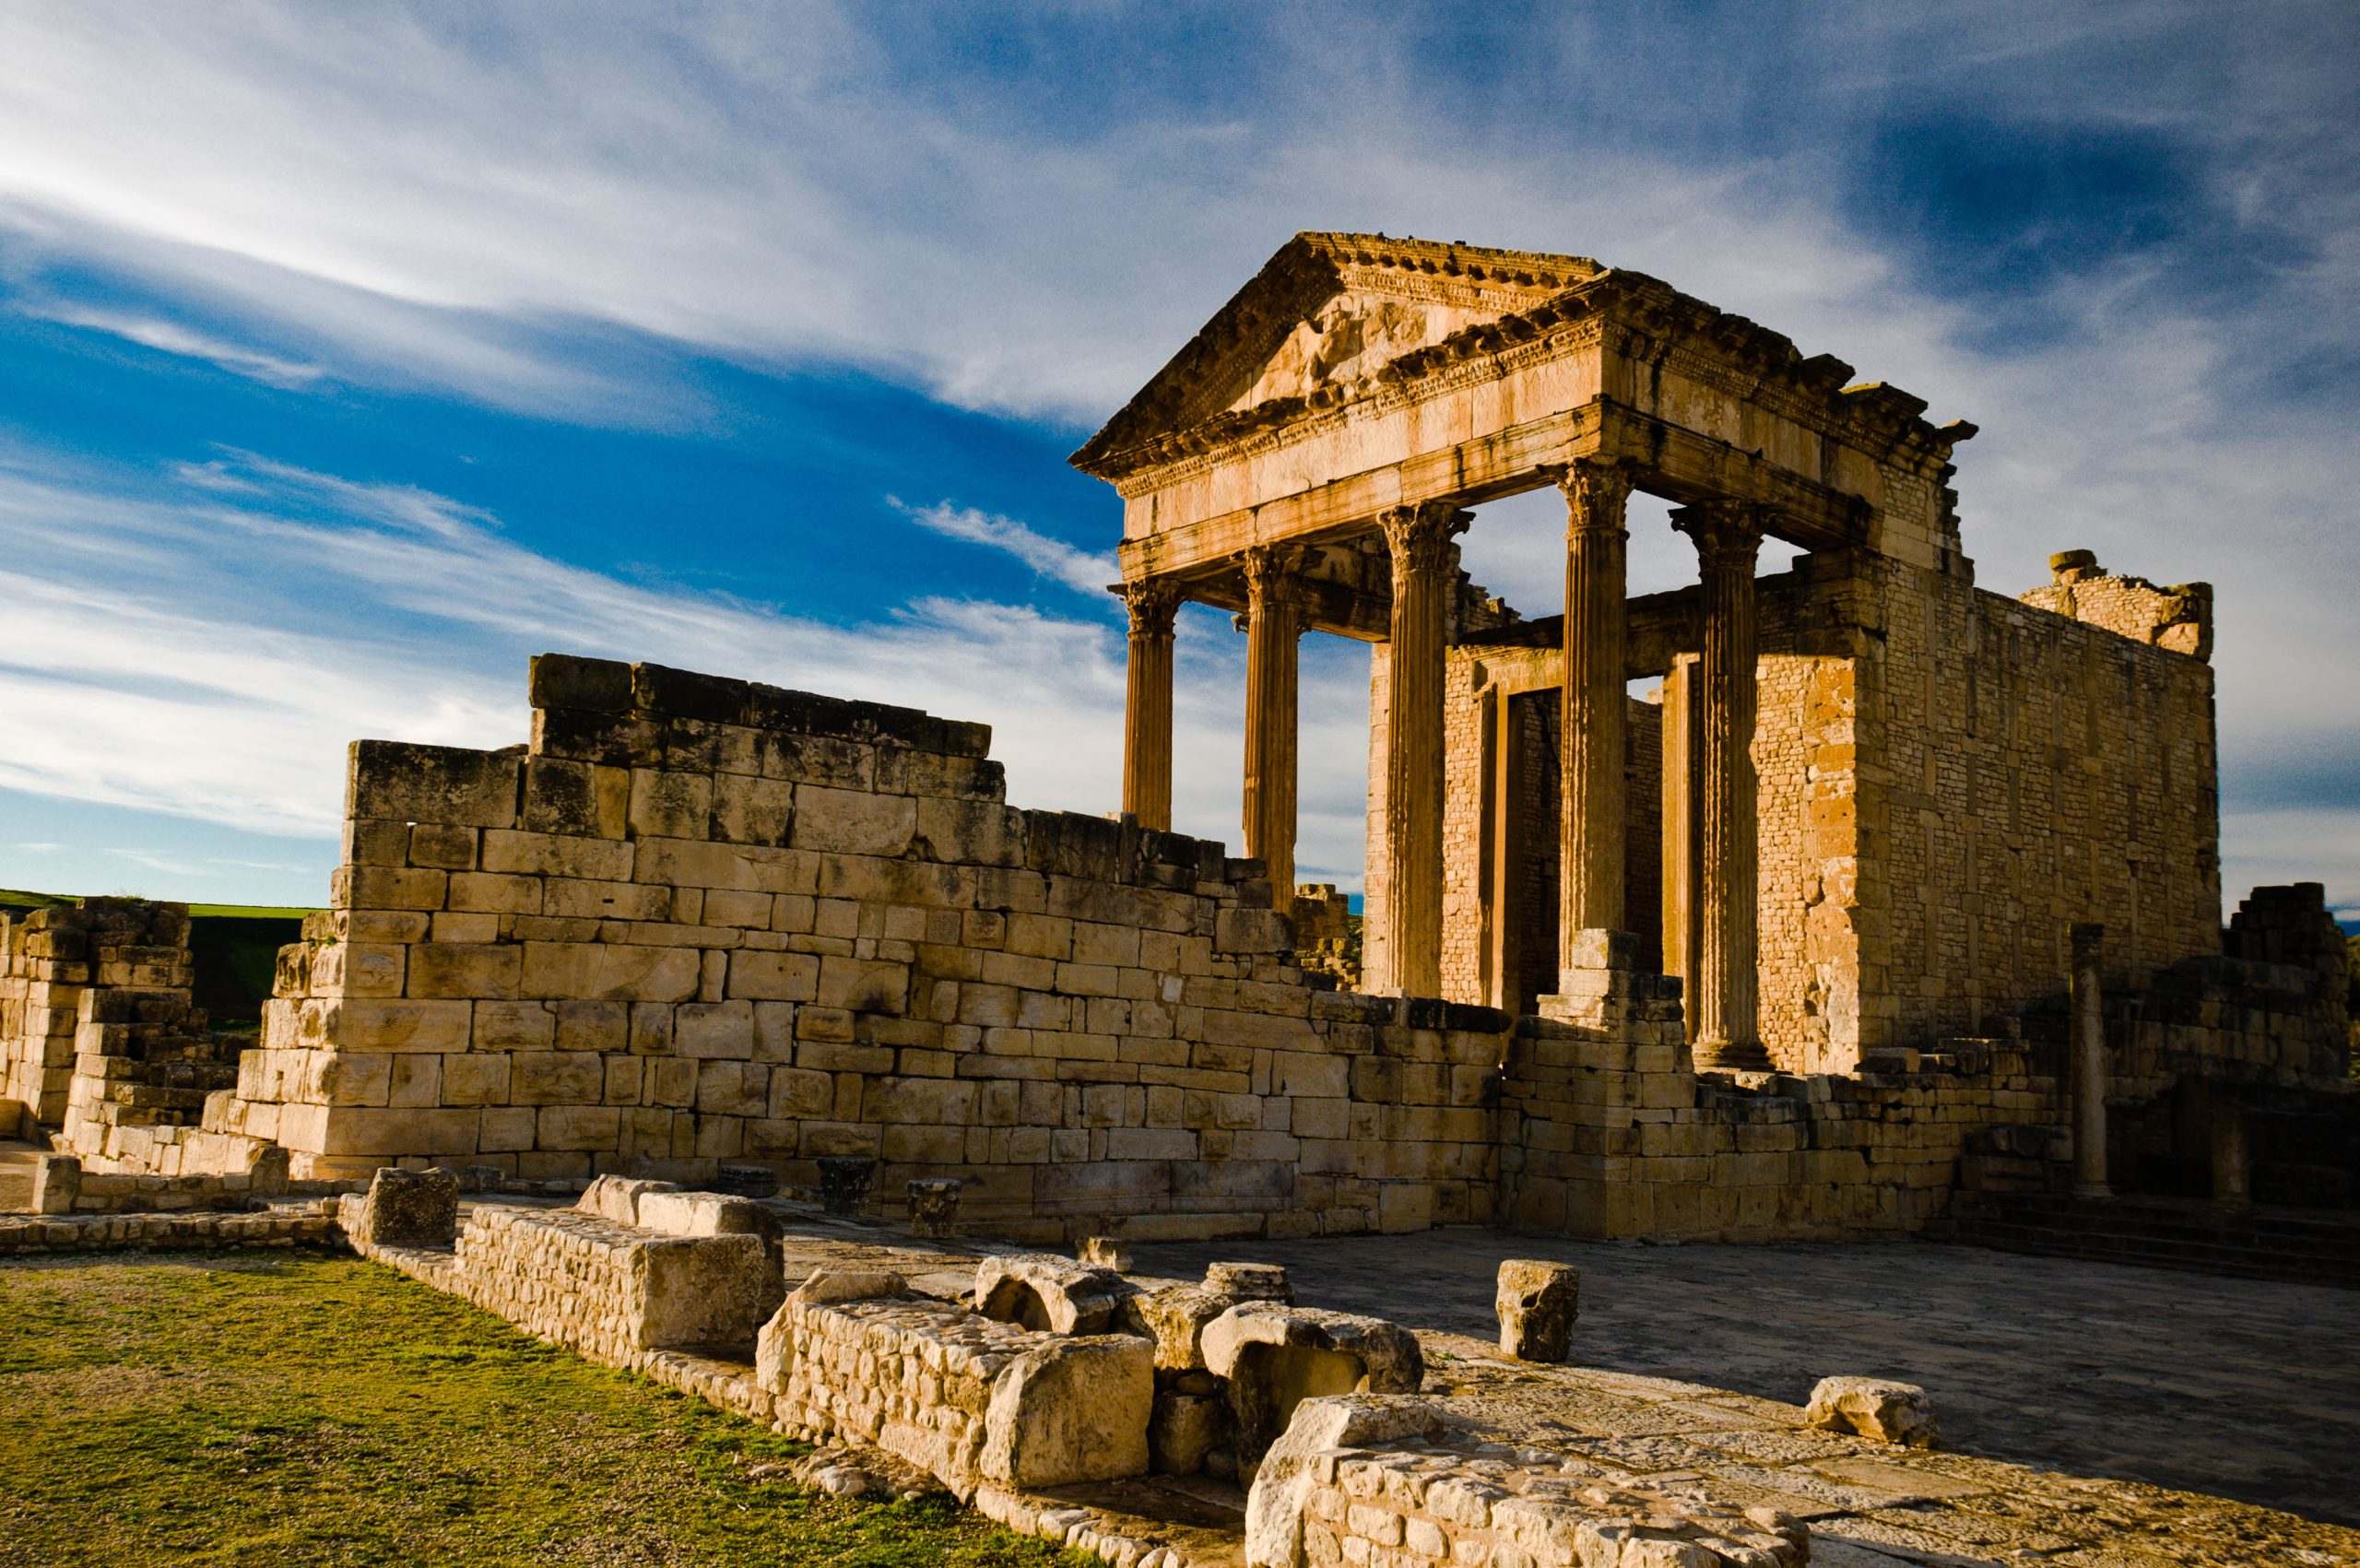 The archaeological site of Dougga